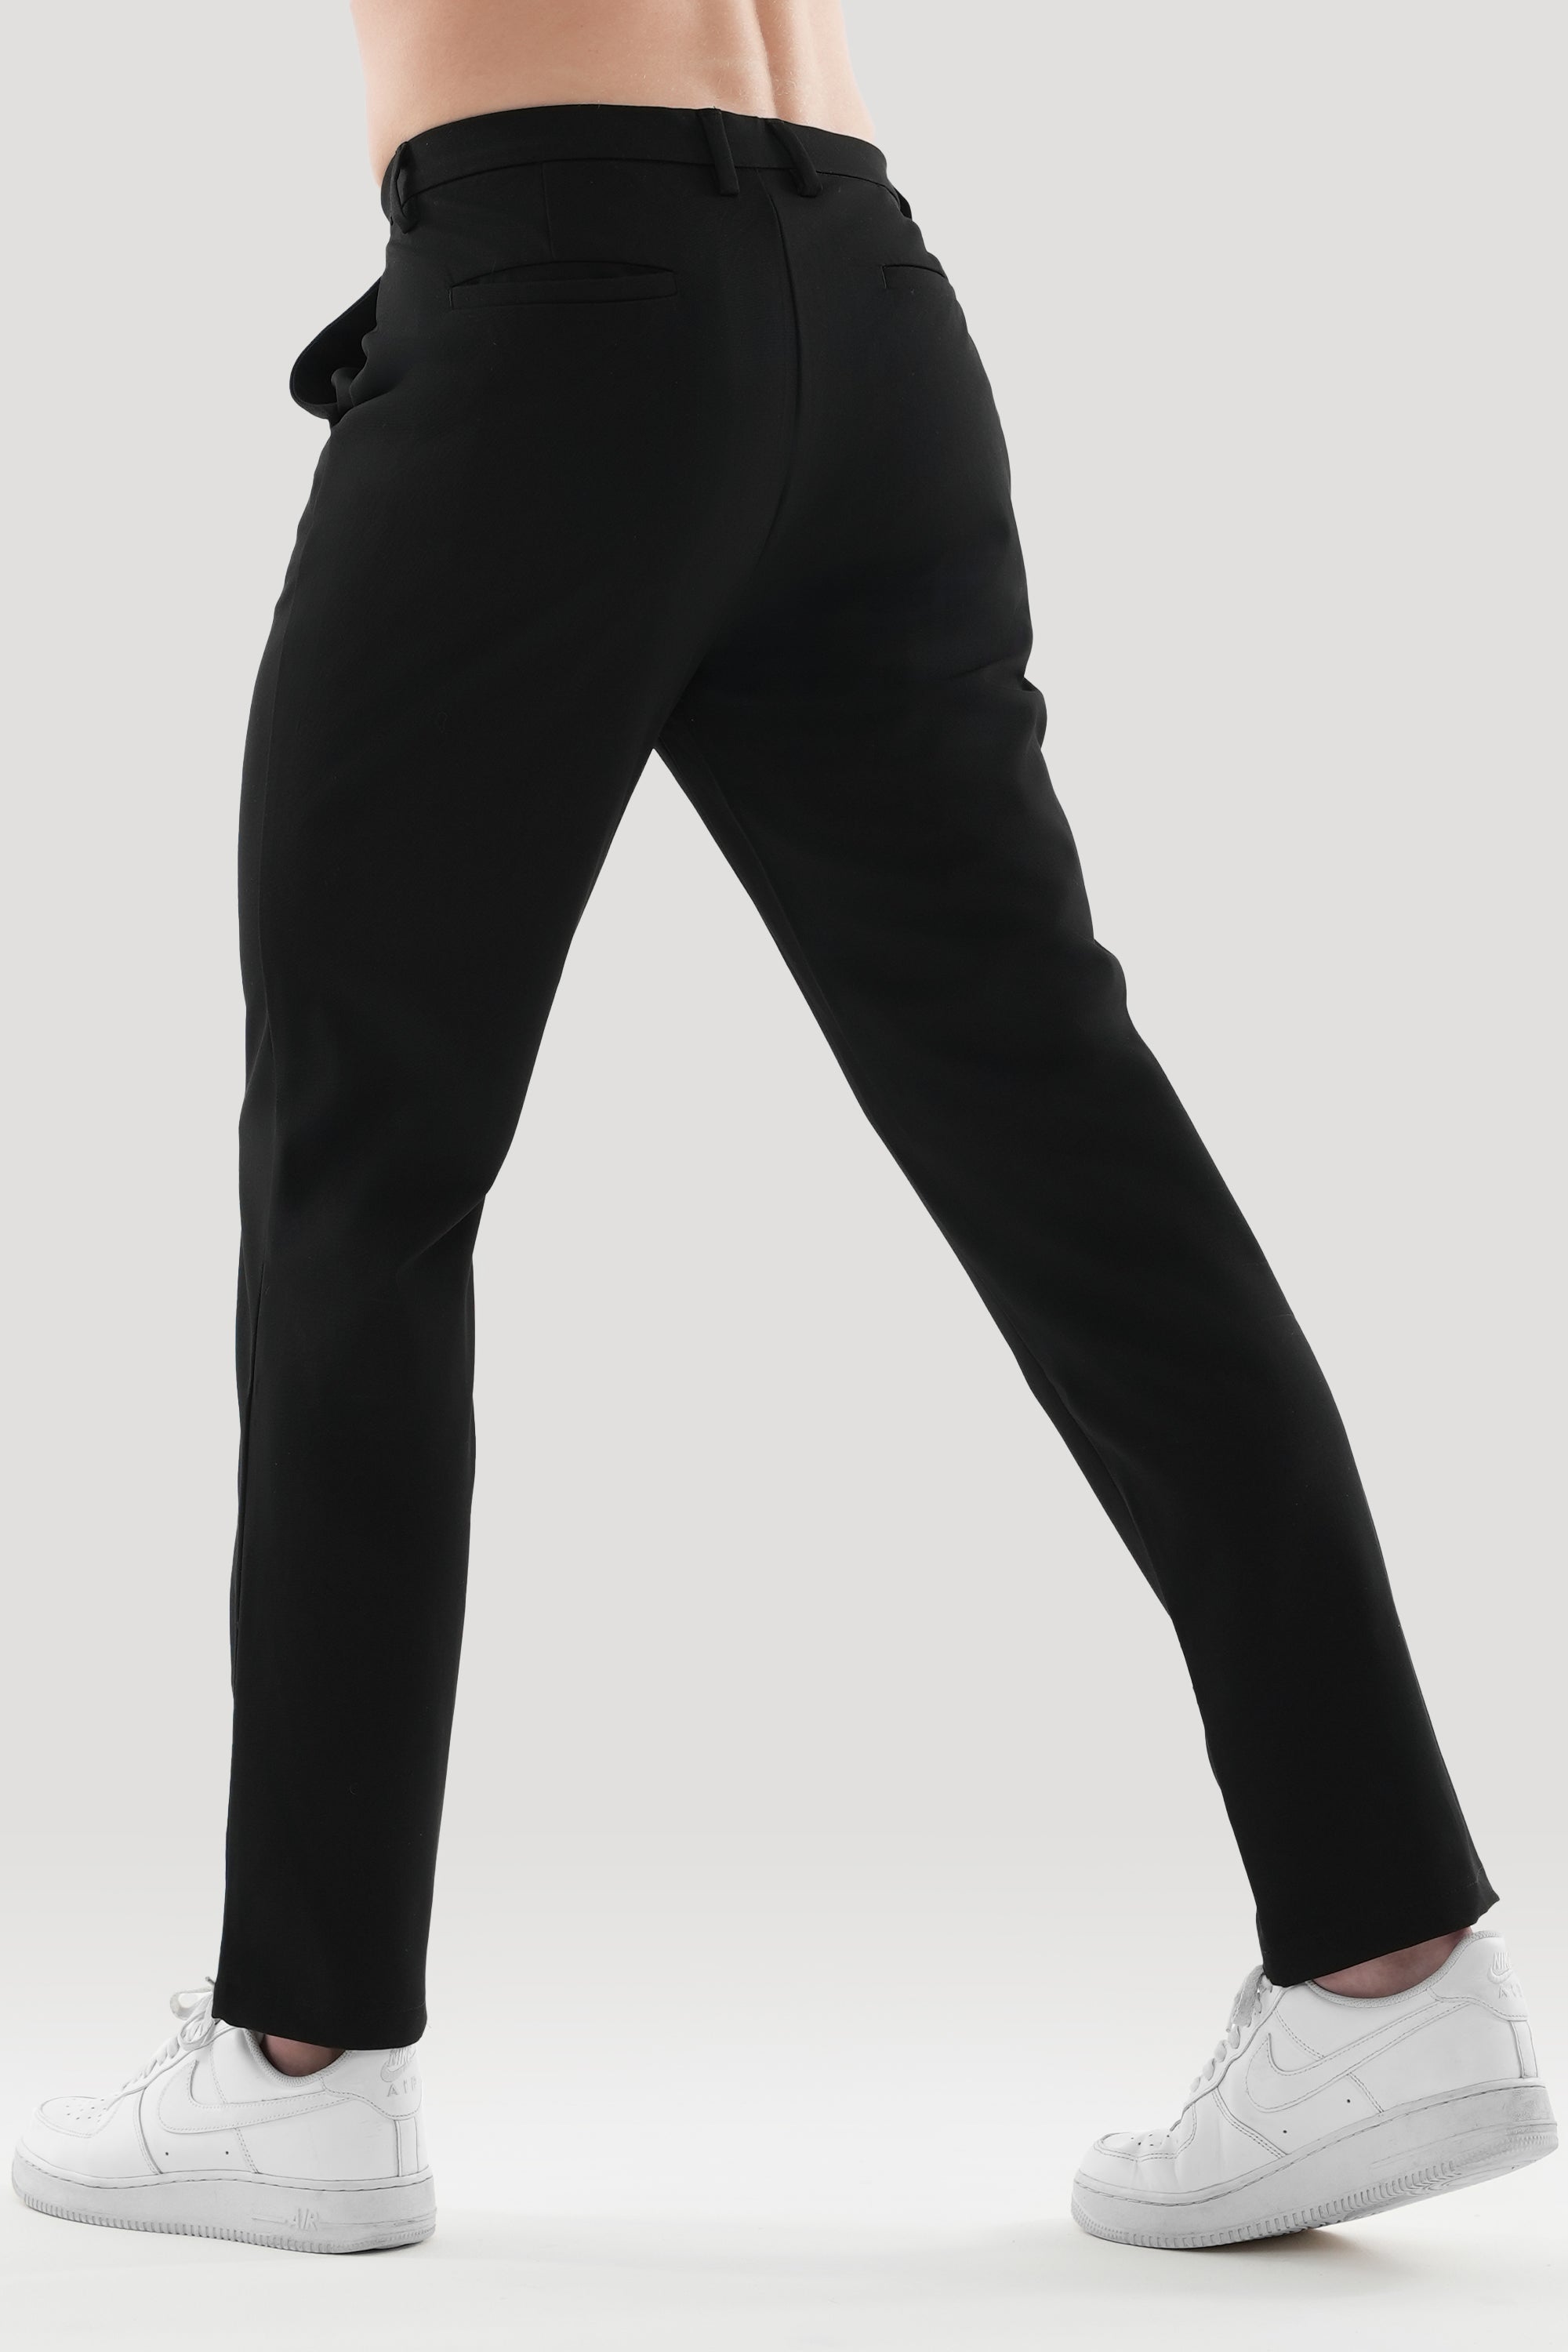 THE LUCIA TROUSERS - BLACK - ICON. AMSTERDAM